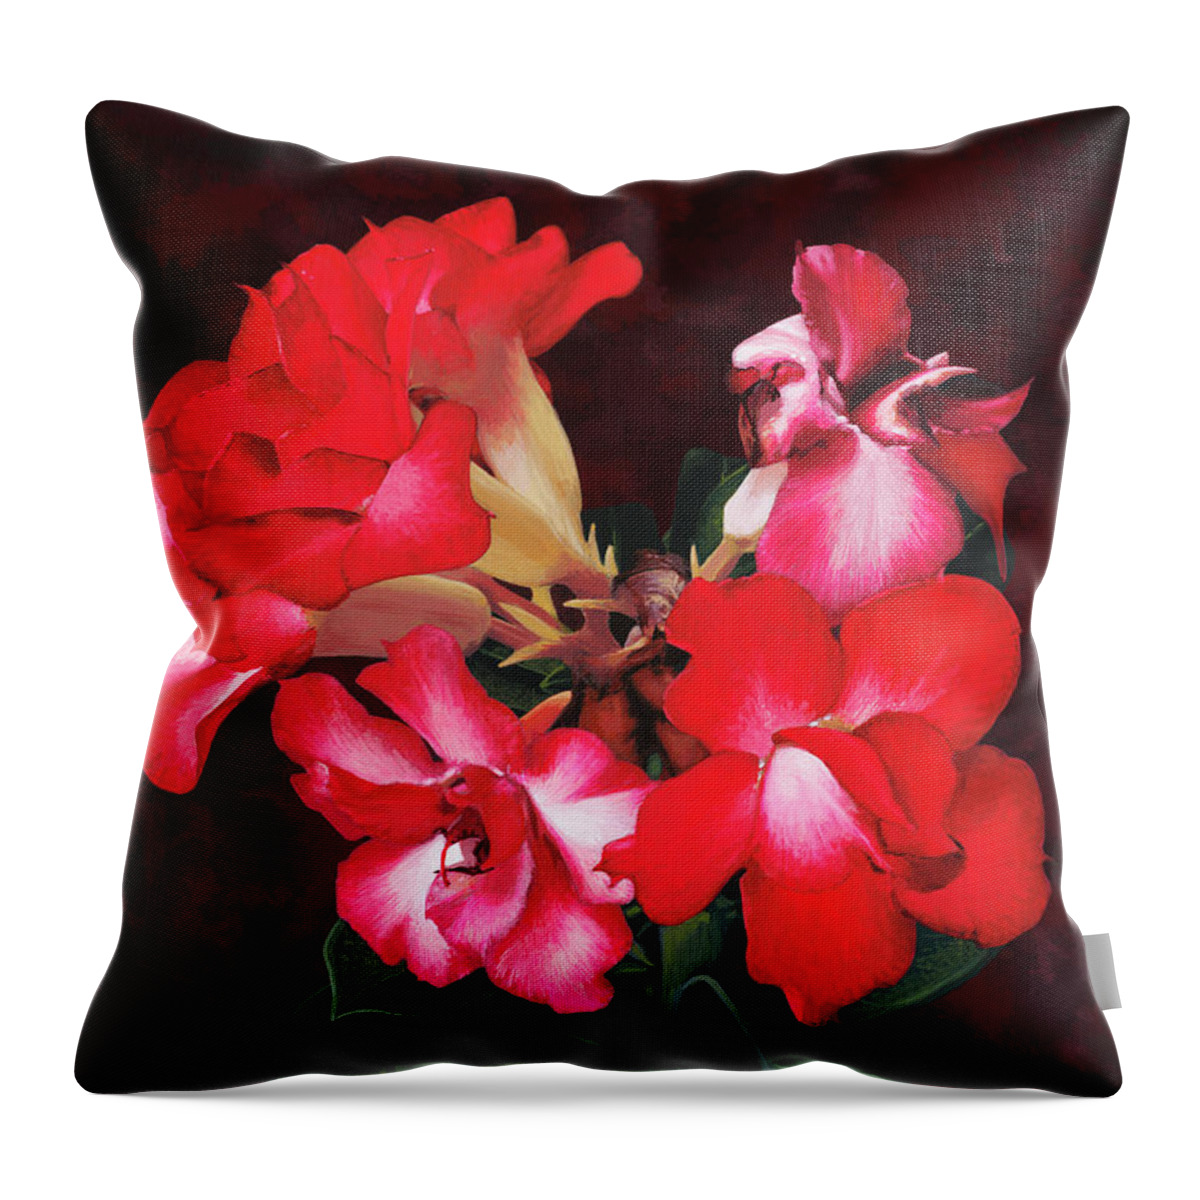 Floral Throw Pillow featuring the painting Night Bloom by Jon Carroll Otterson